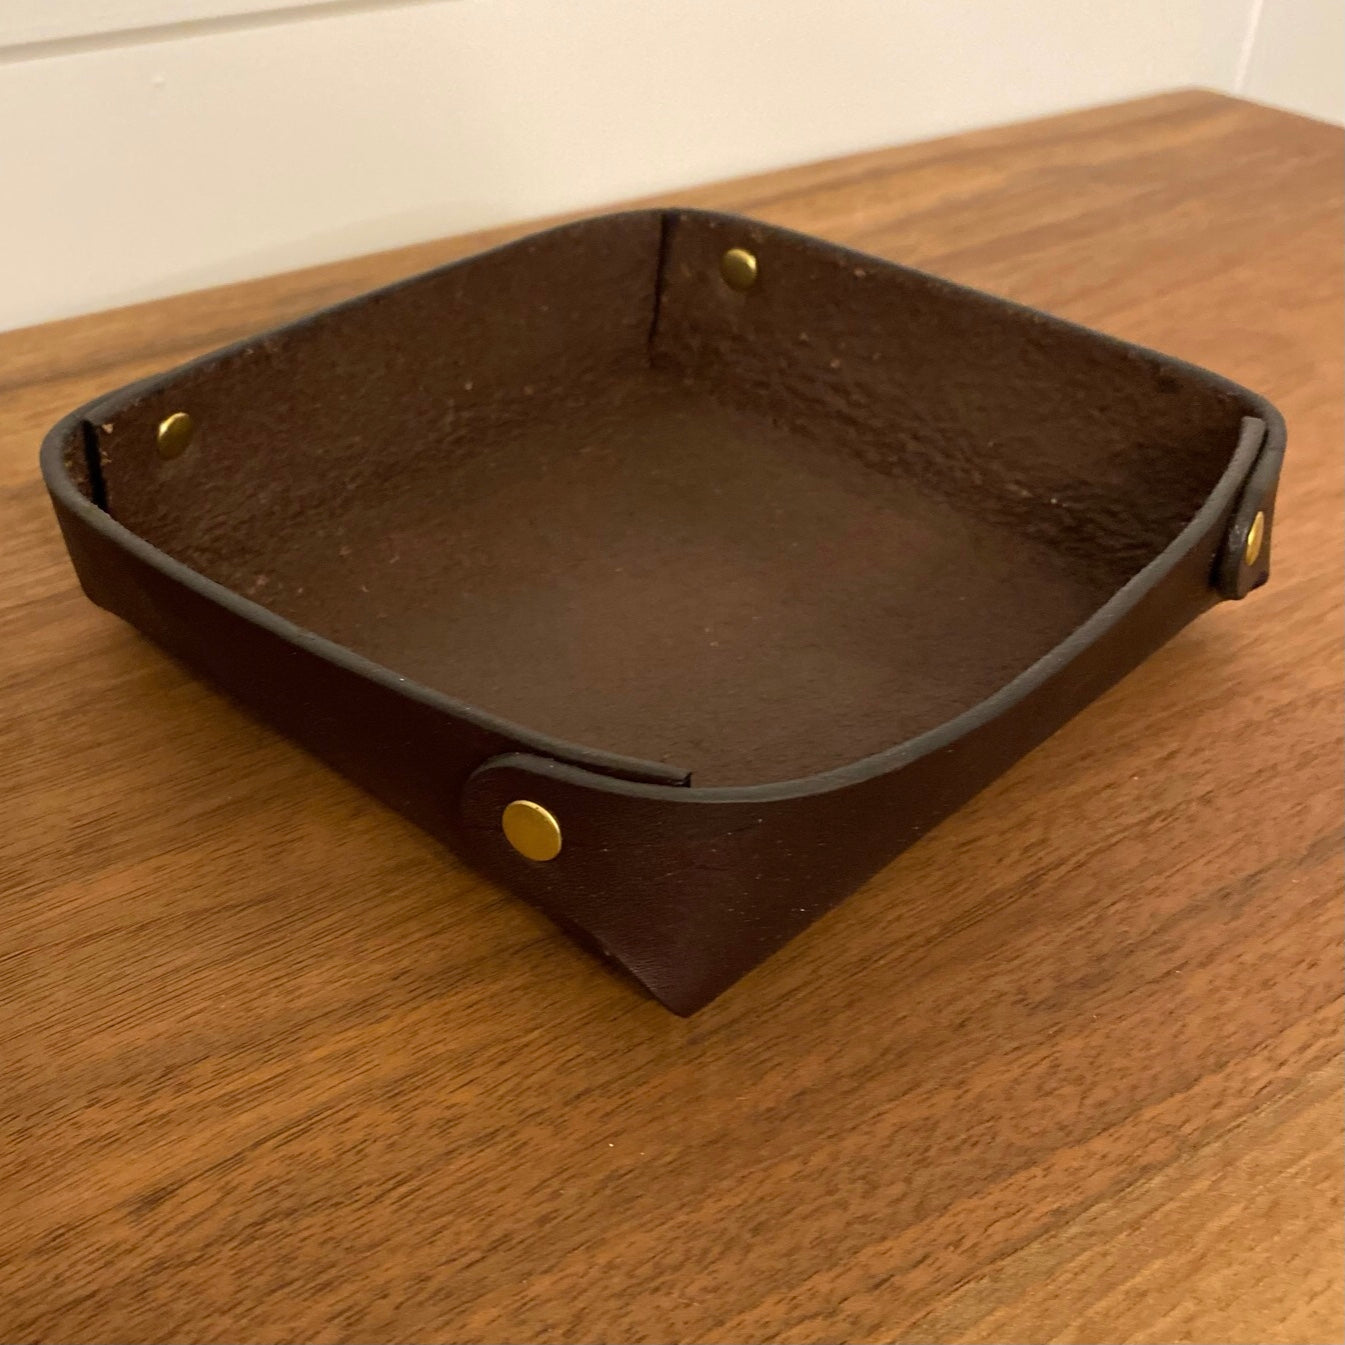 Brown Leather Valet Tray